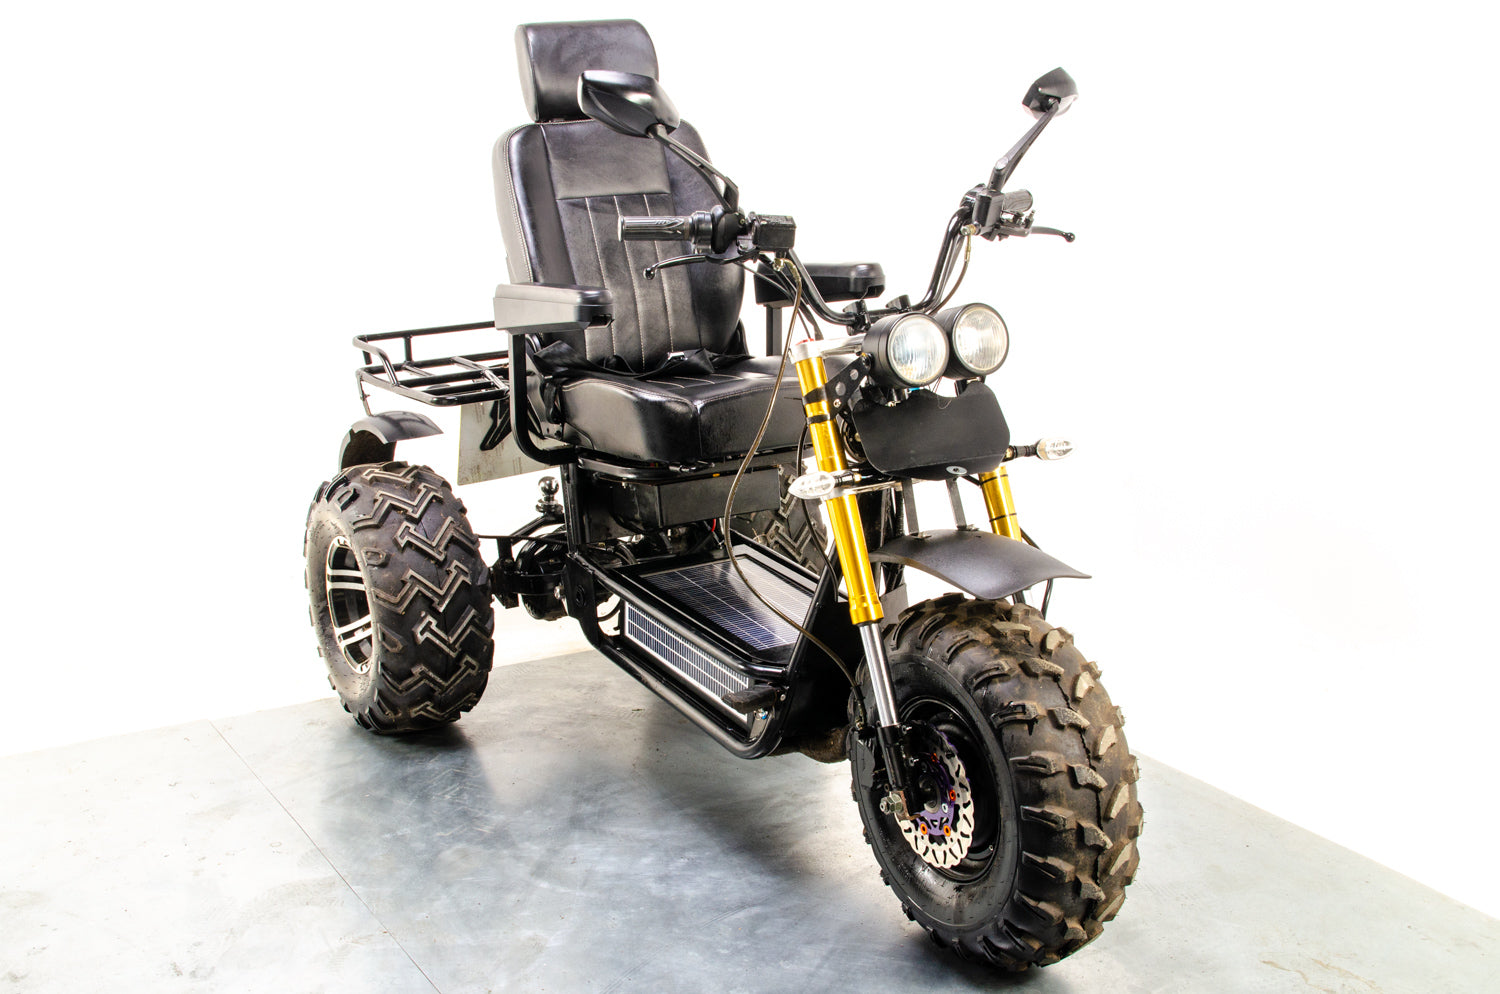 All-Terrain Off-Road Mobility Scooter Trike ATV AWD Monster Wheels Road Legal 20mph